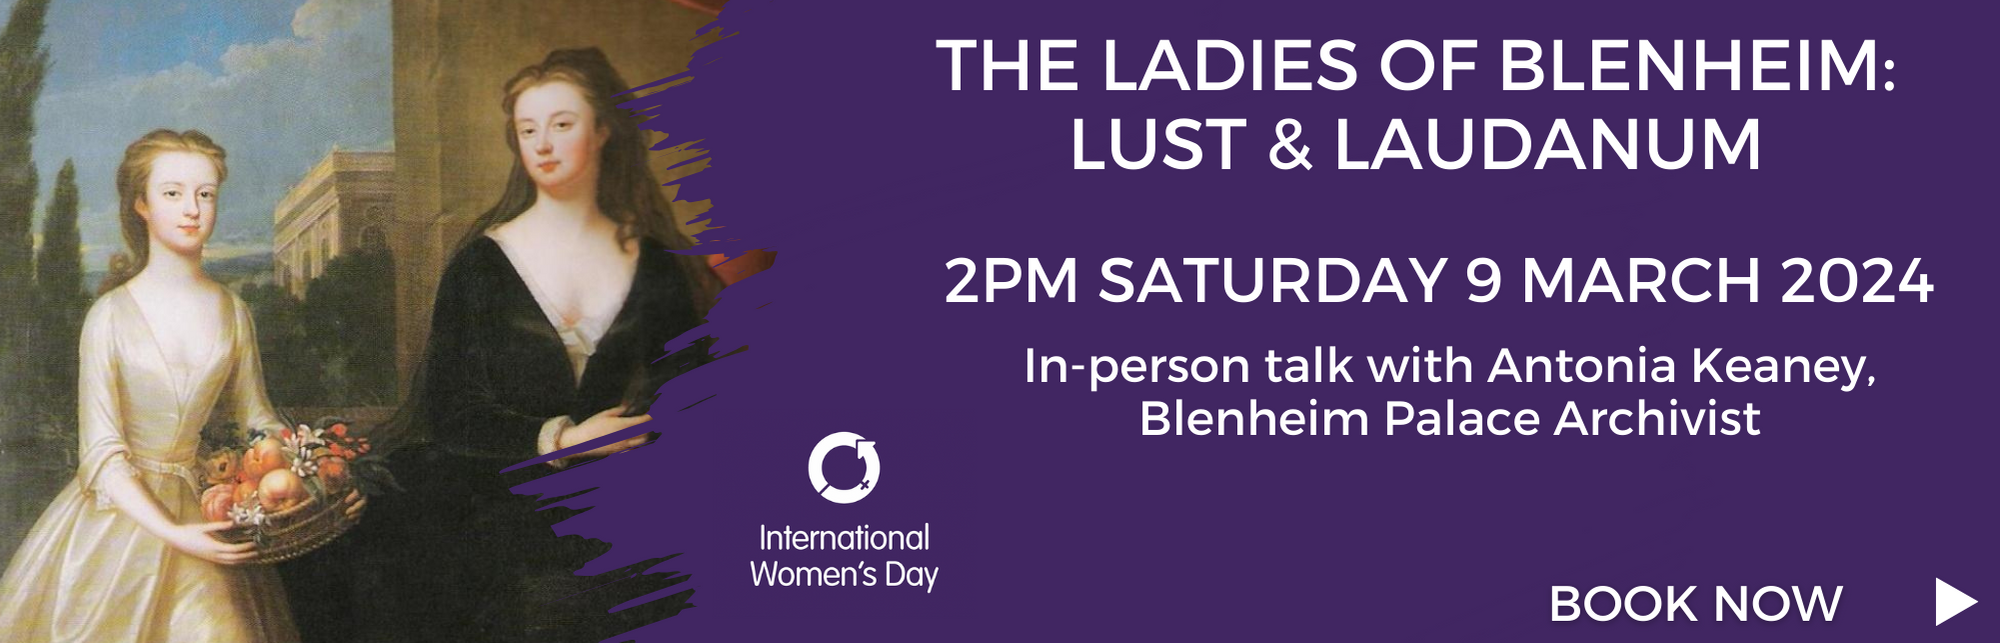 Click here to book tickets for Lust & Laudanum - The Ladies of Blenheim, a talk by Antonia Keaney (9 March 2024)